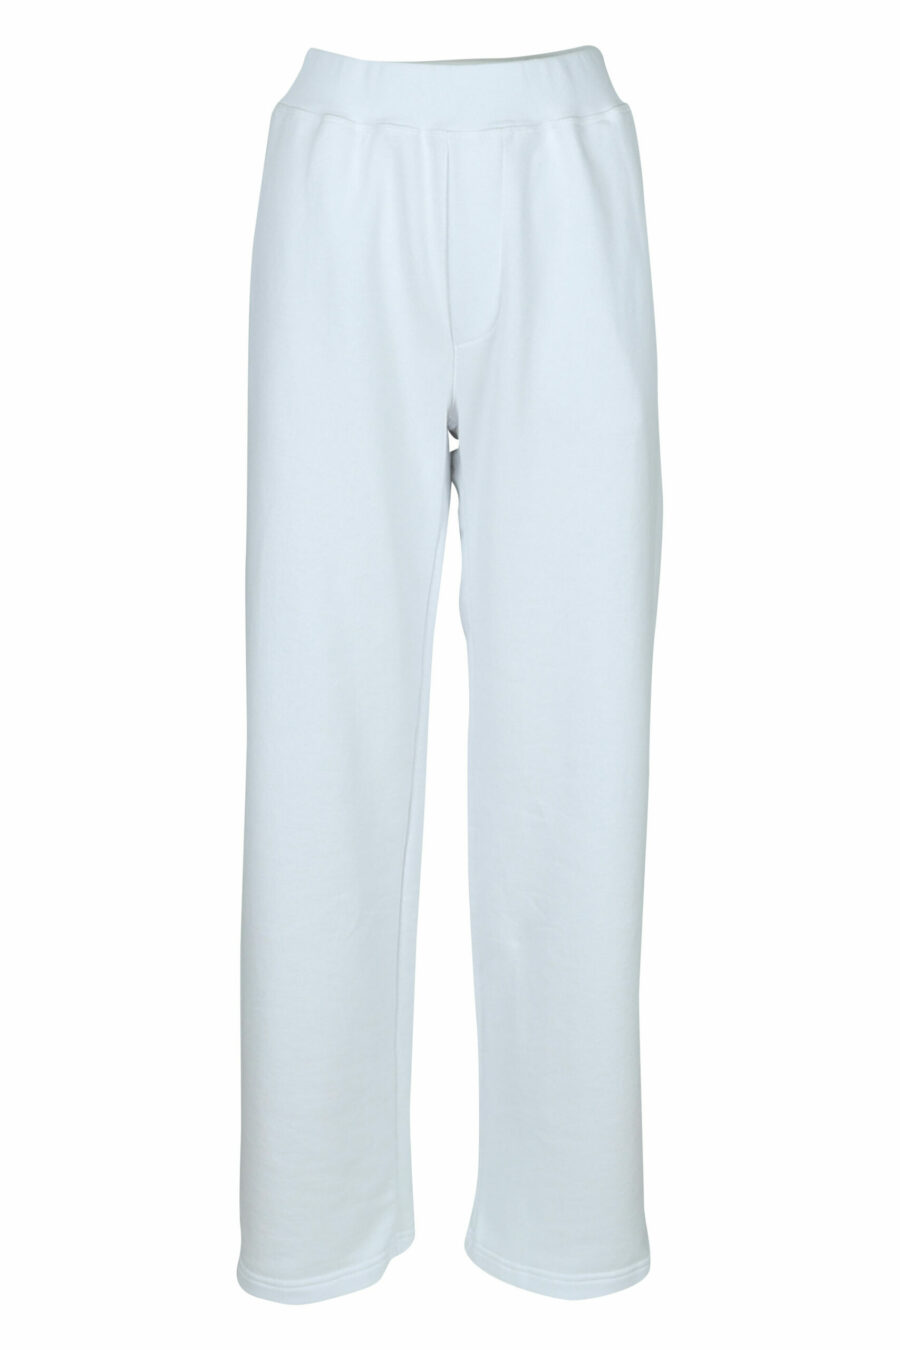 Wide white trousers with logo - 8054148457884 scaled